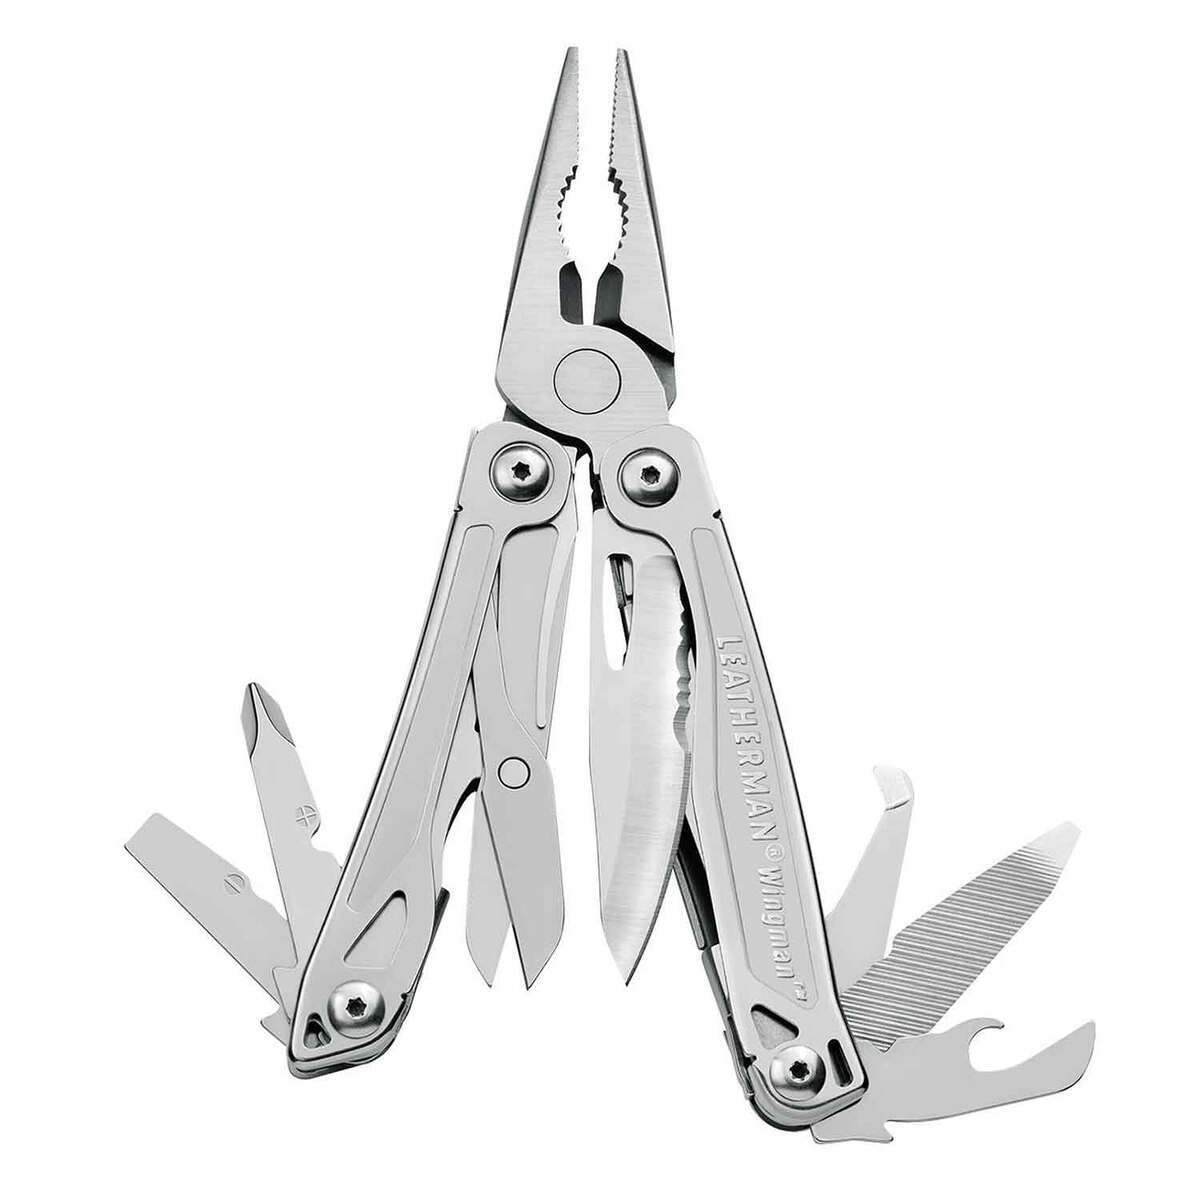 Leatherman Charge Plus - Multi-tool with 19 all locking tools including  knives, pliers, saw and screwdriver, camping and fishing tool made in the